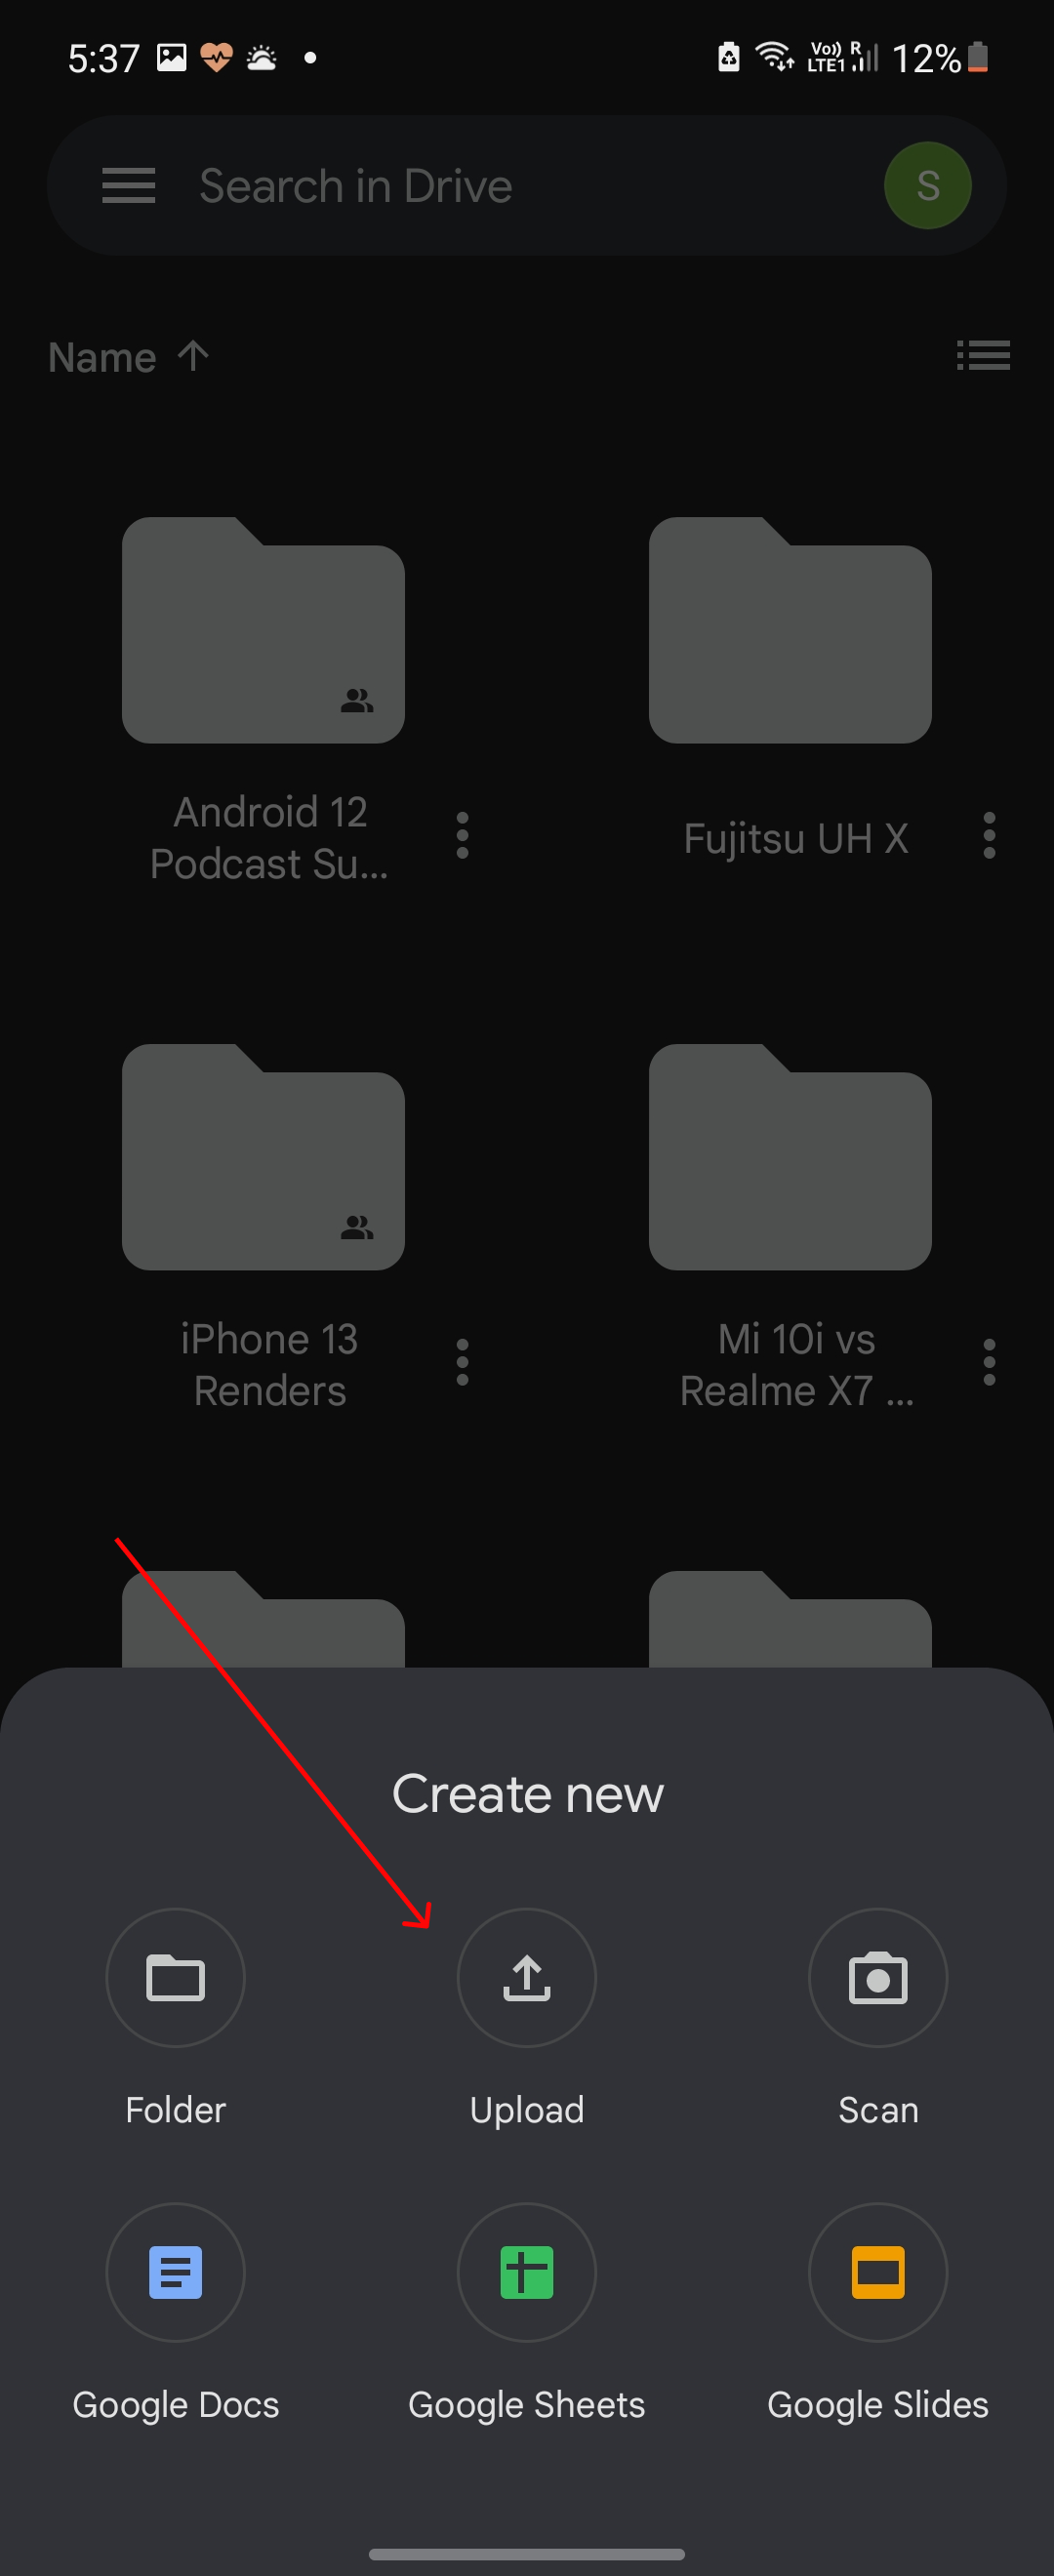 Upload files to Drive on mobile